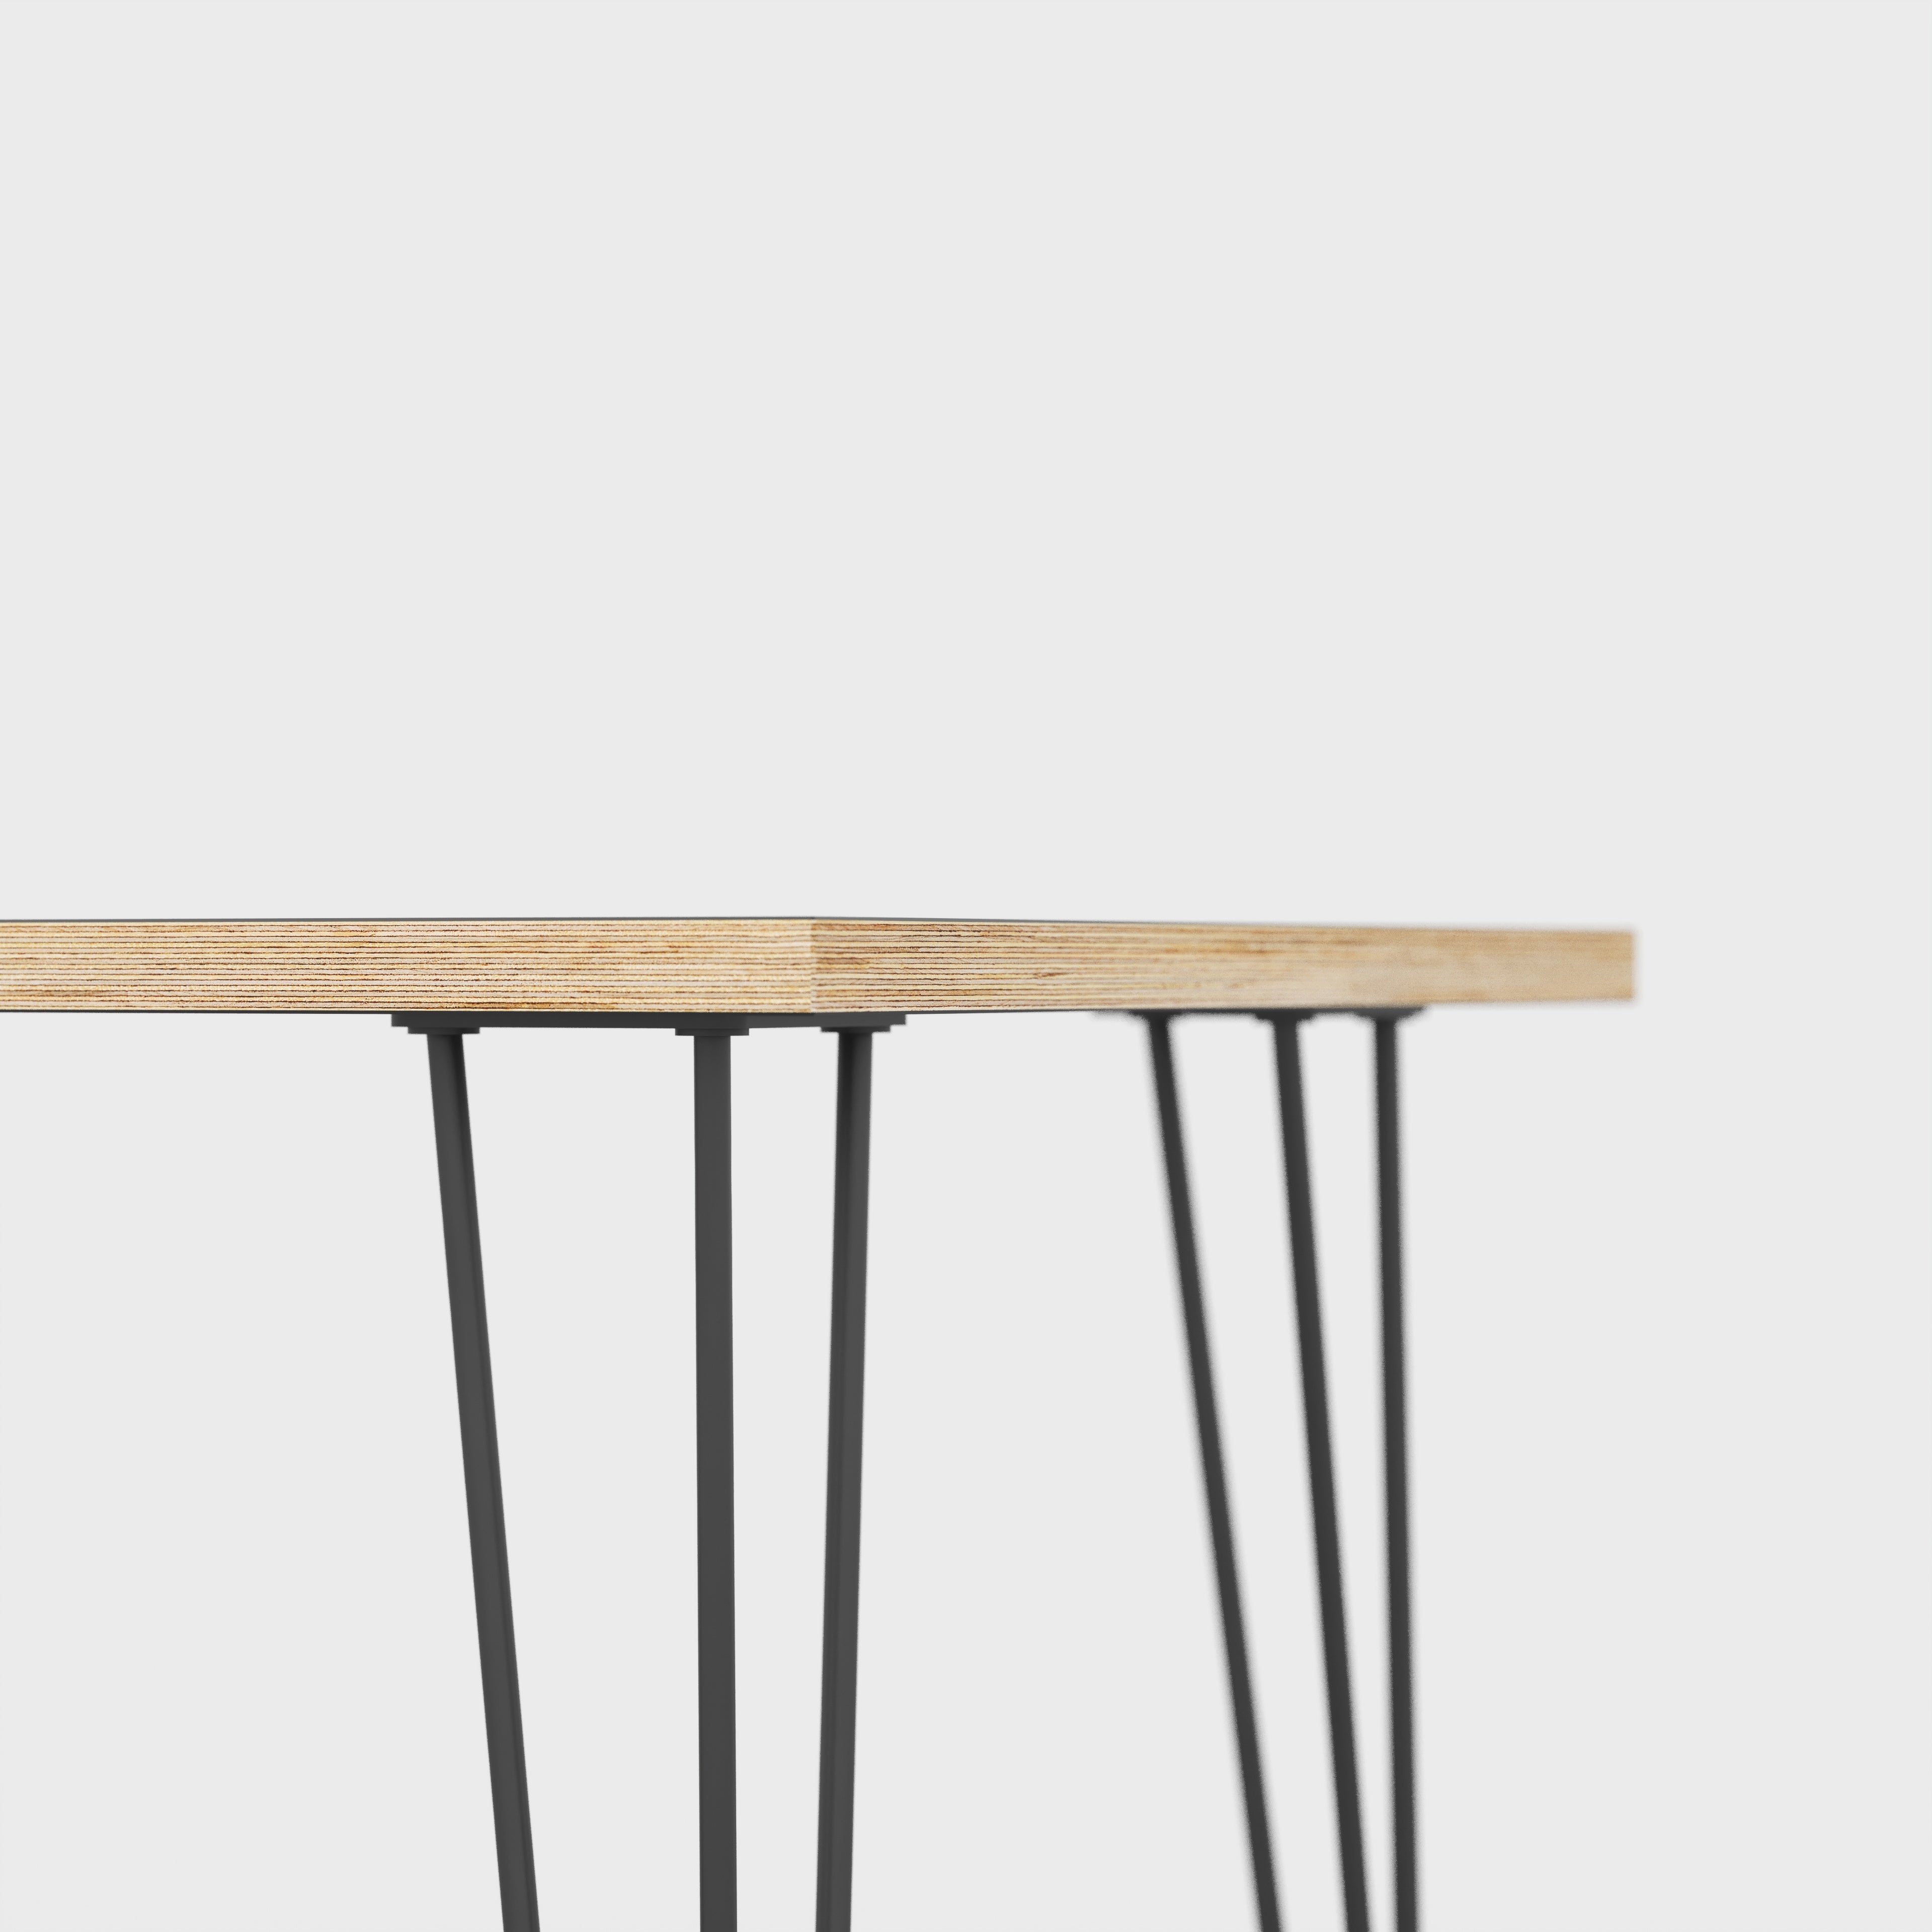 Custom Plywood Side Table with Hairpin Legs